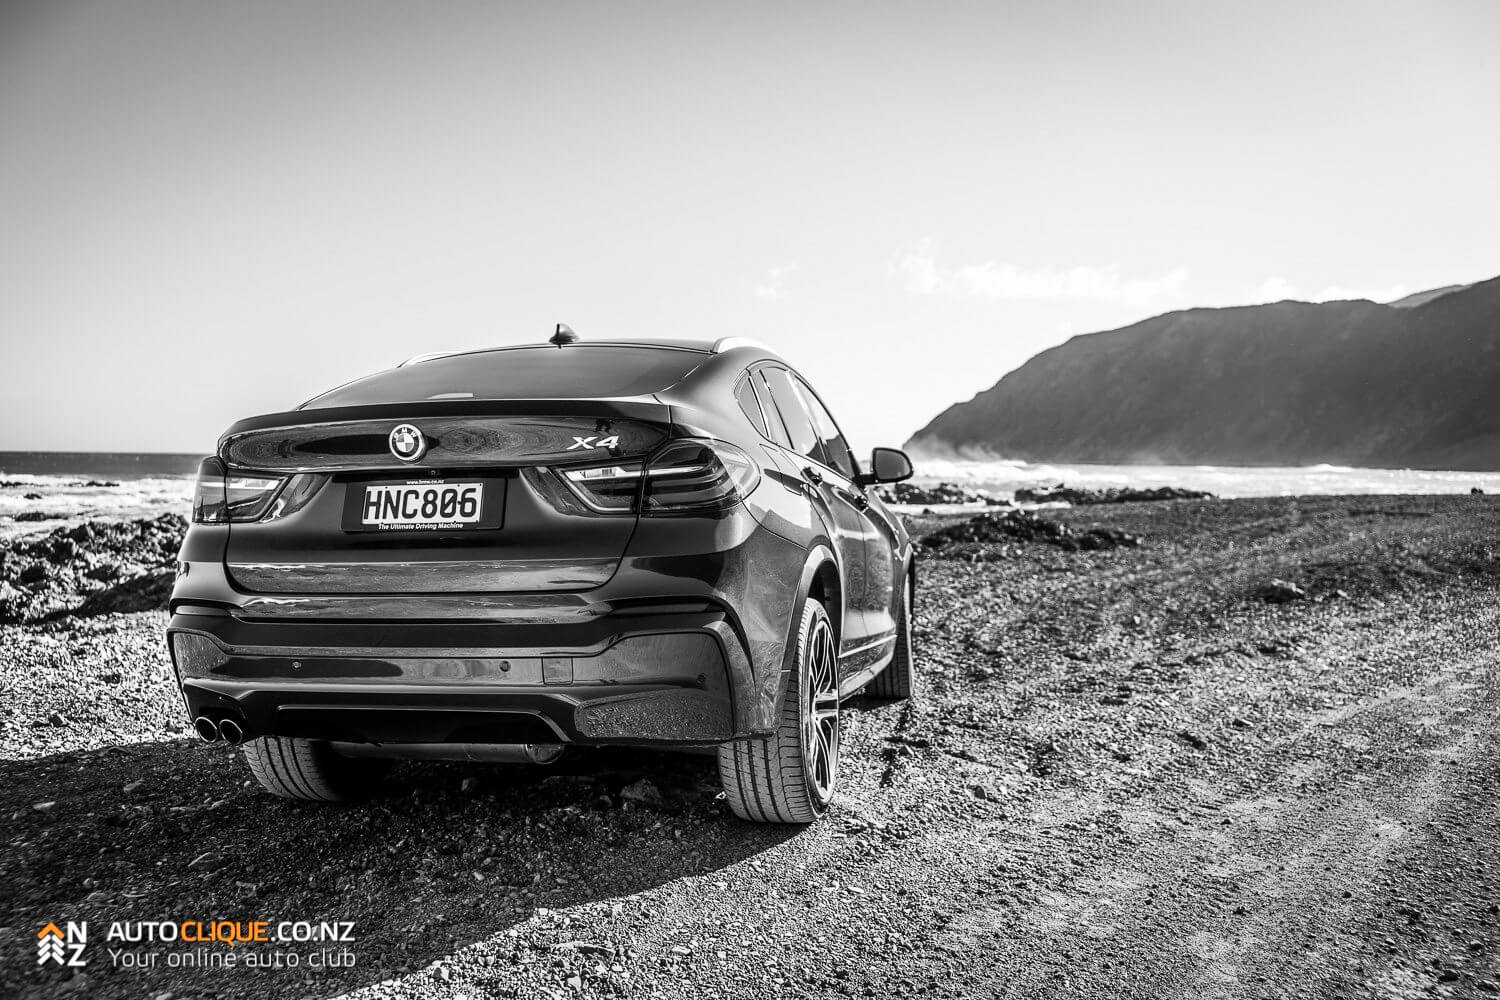 BMW-X4-35d-RaodTested-Review-4